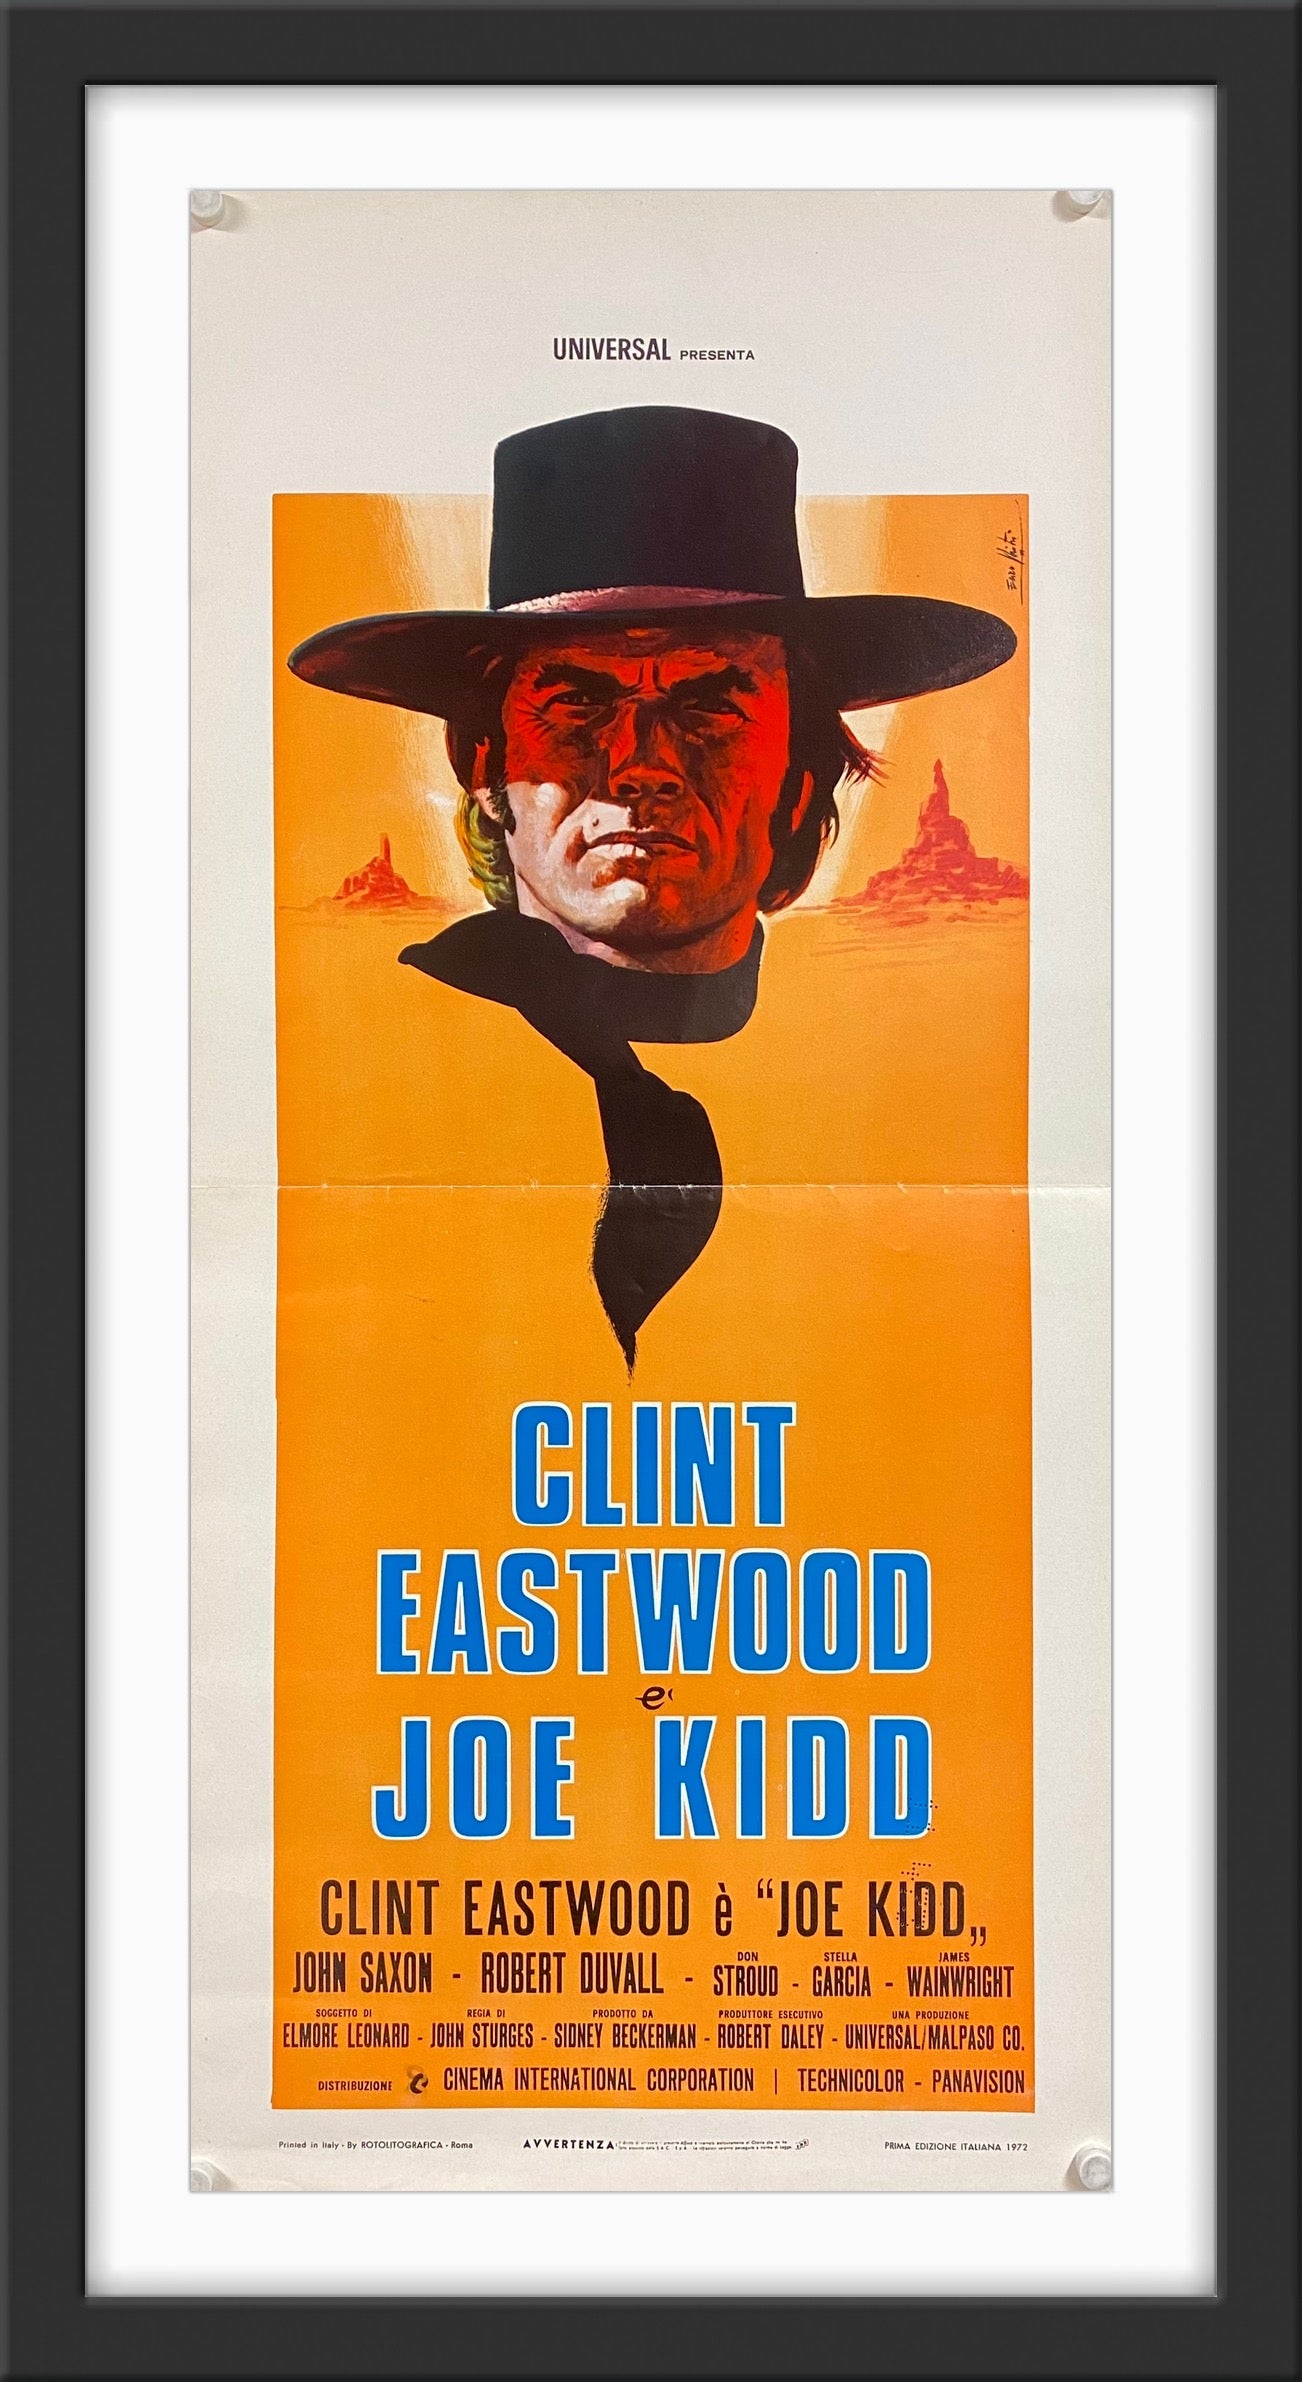 An original Italian movie poster for the Clint Eastwood film Hoe Kidd